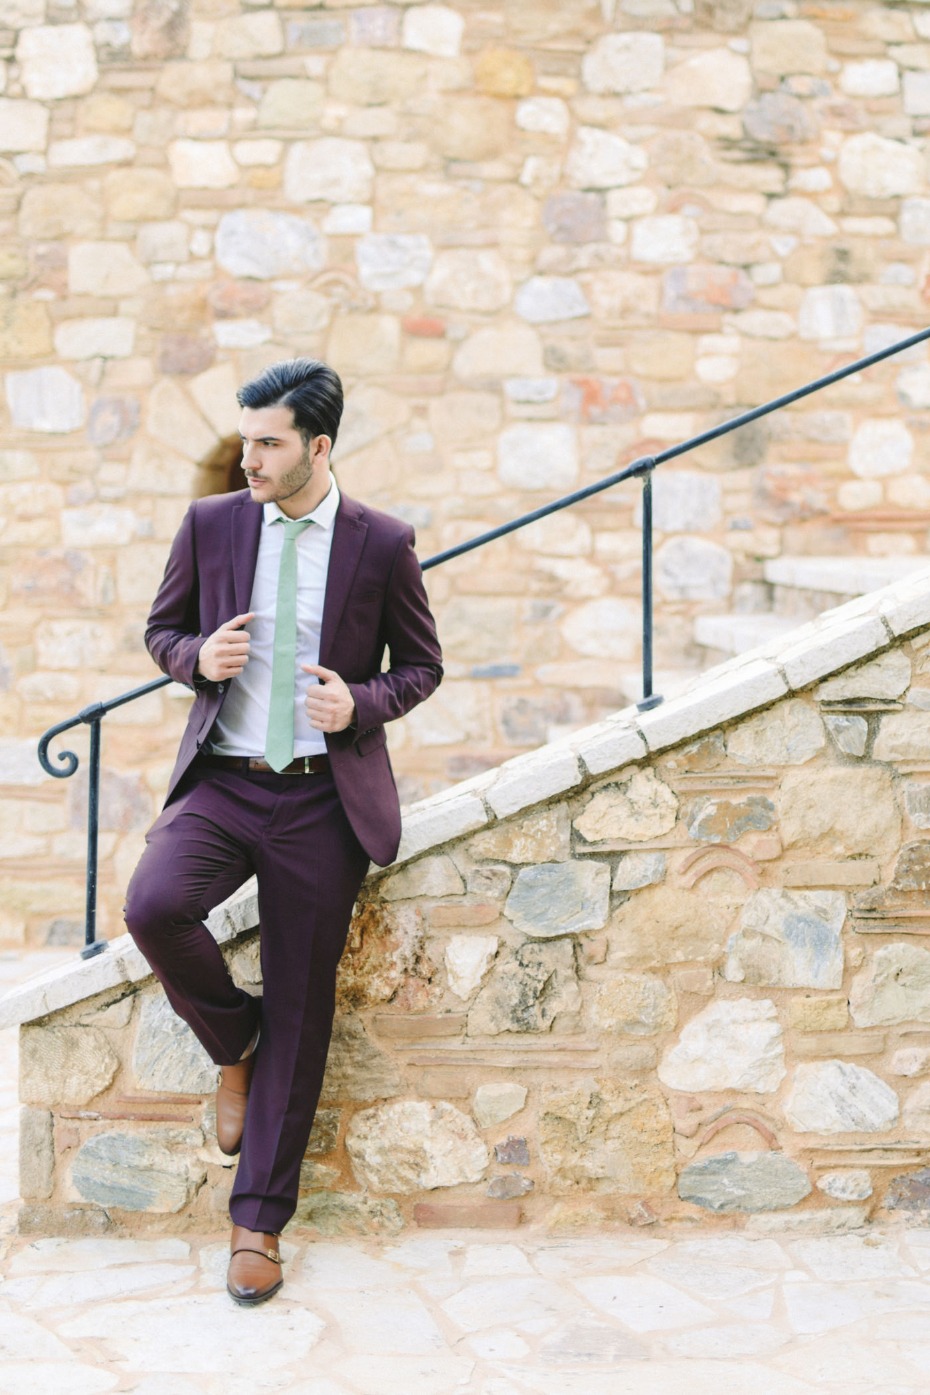 Eggplant colored suit with green tie